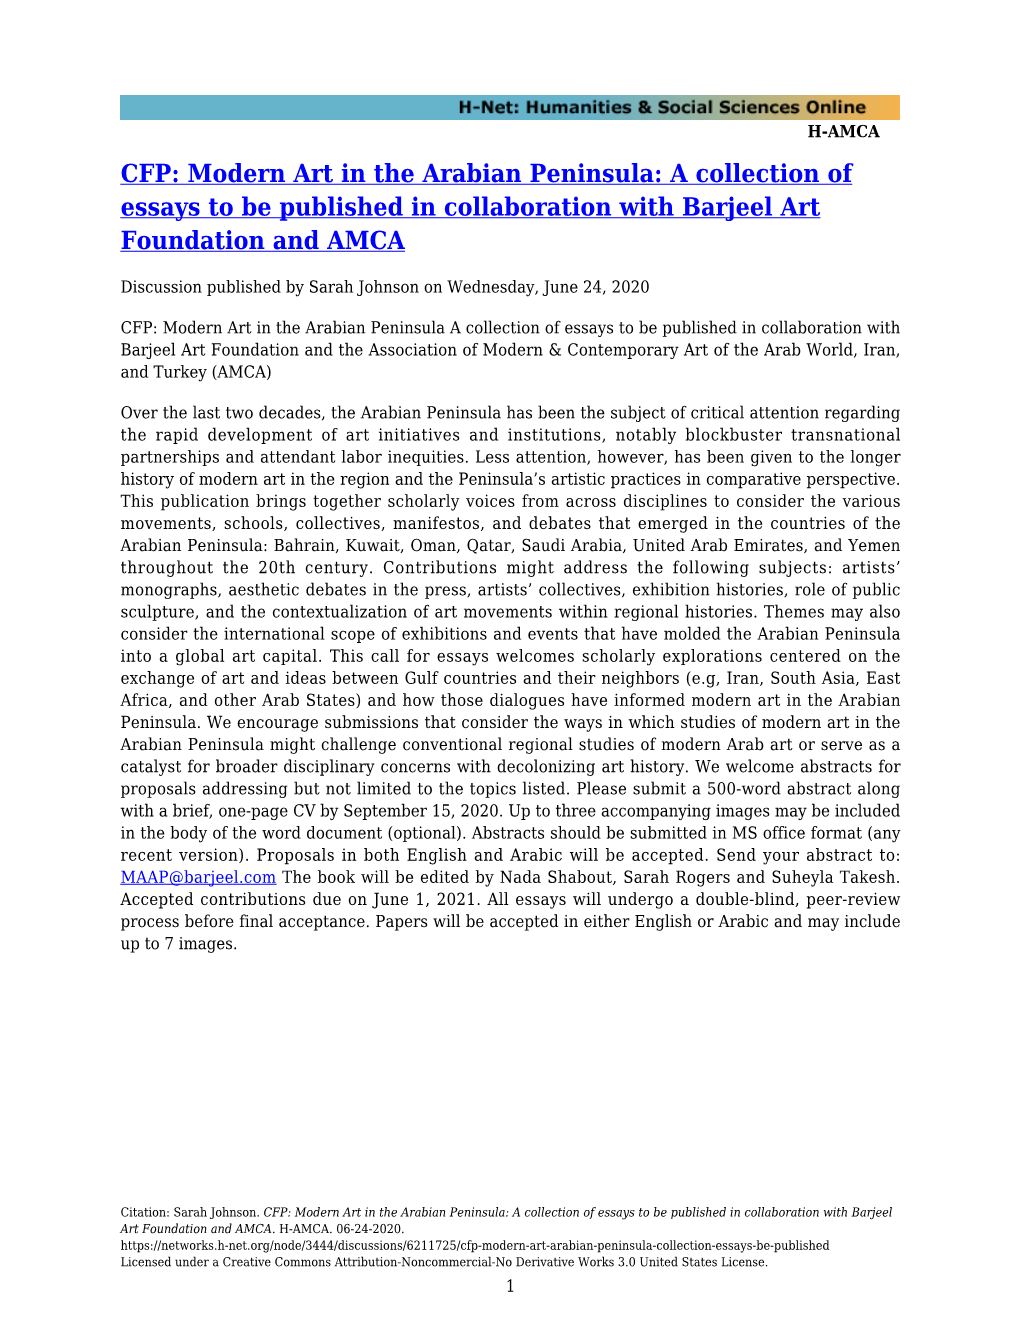 CFP: Modern Art in the Arabian Peninsula: a Collection of Essays to Be Published in Collaboration with Barjeel Art Foundation and AMCA